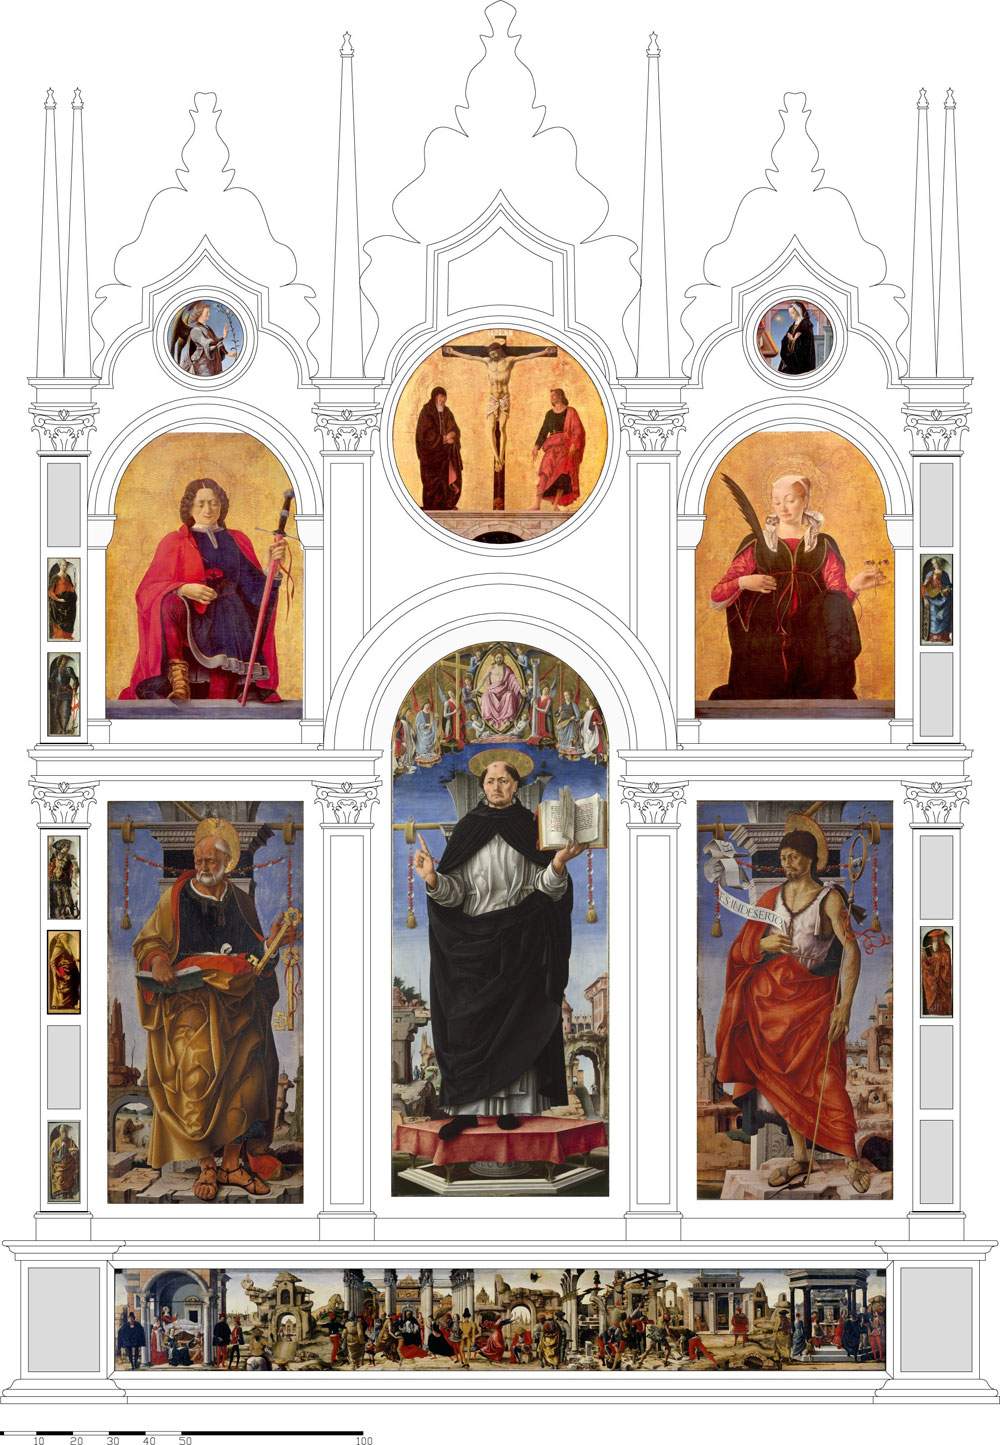 Griffoni Polyptych in support of health emergency. Launched fundraiser #laculturethatgood.